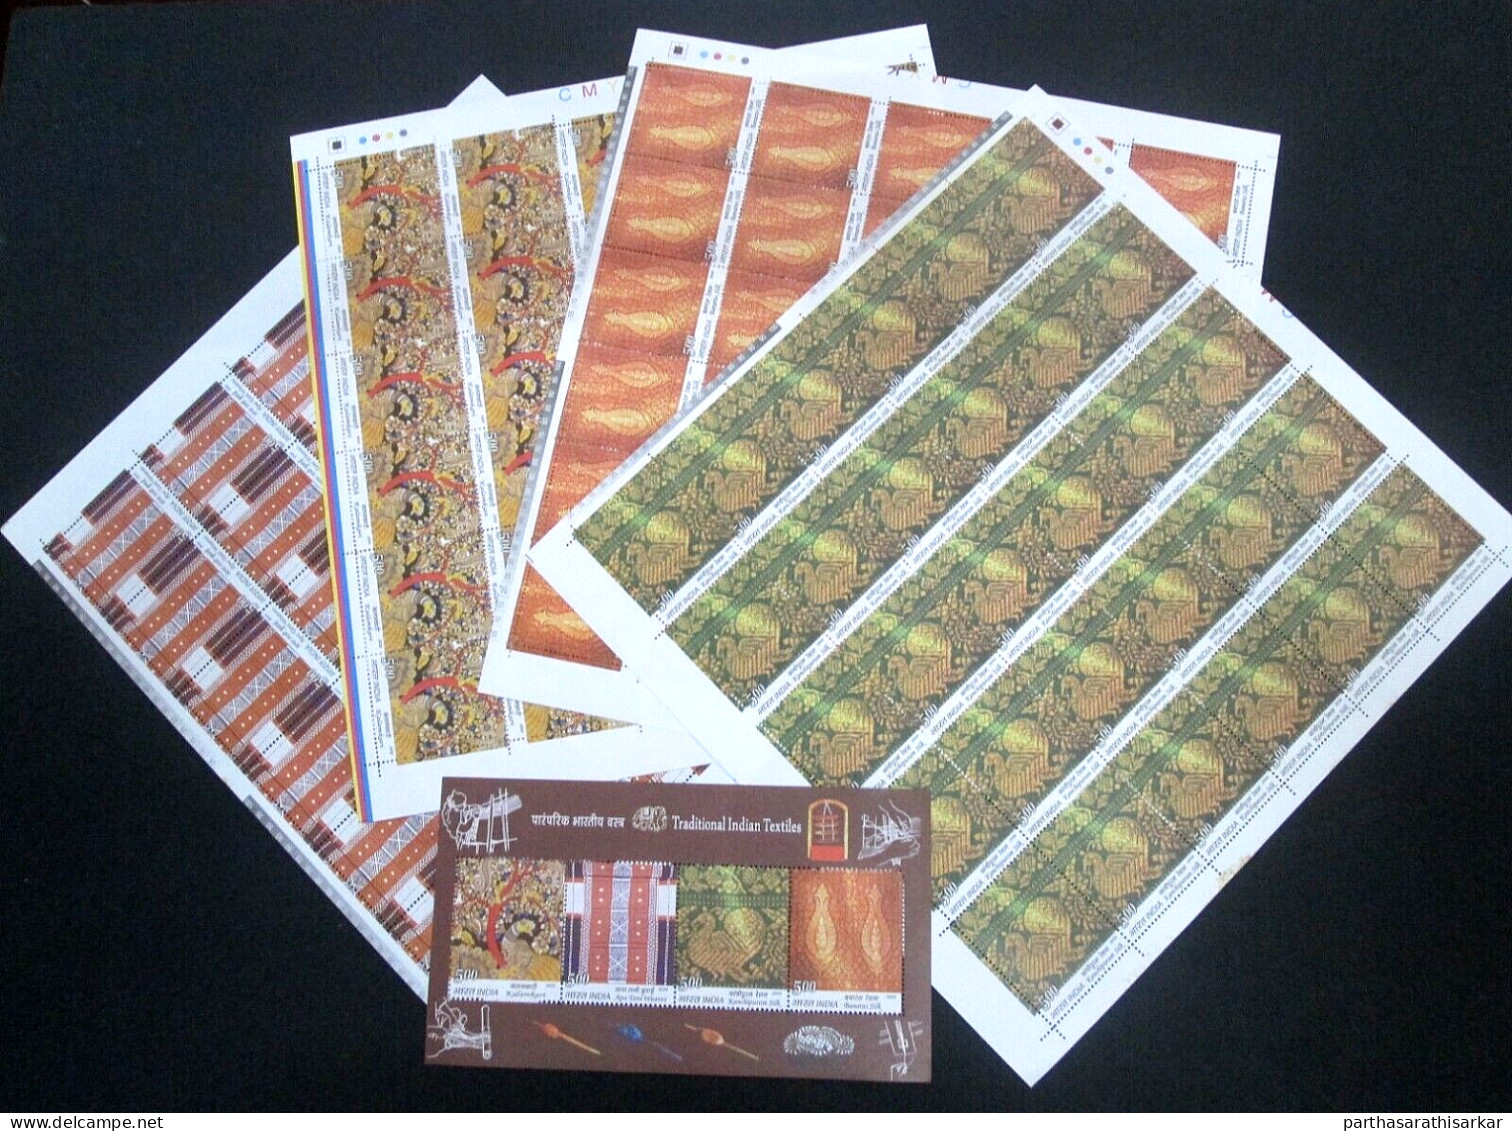 INDIA 2009 TRADITIONAL INDIAN TEXTILES SET OF 4 FULL SHEETS WITH MINIATURE SHEET MS MNH - Gebruikt